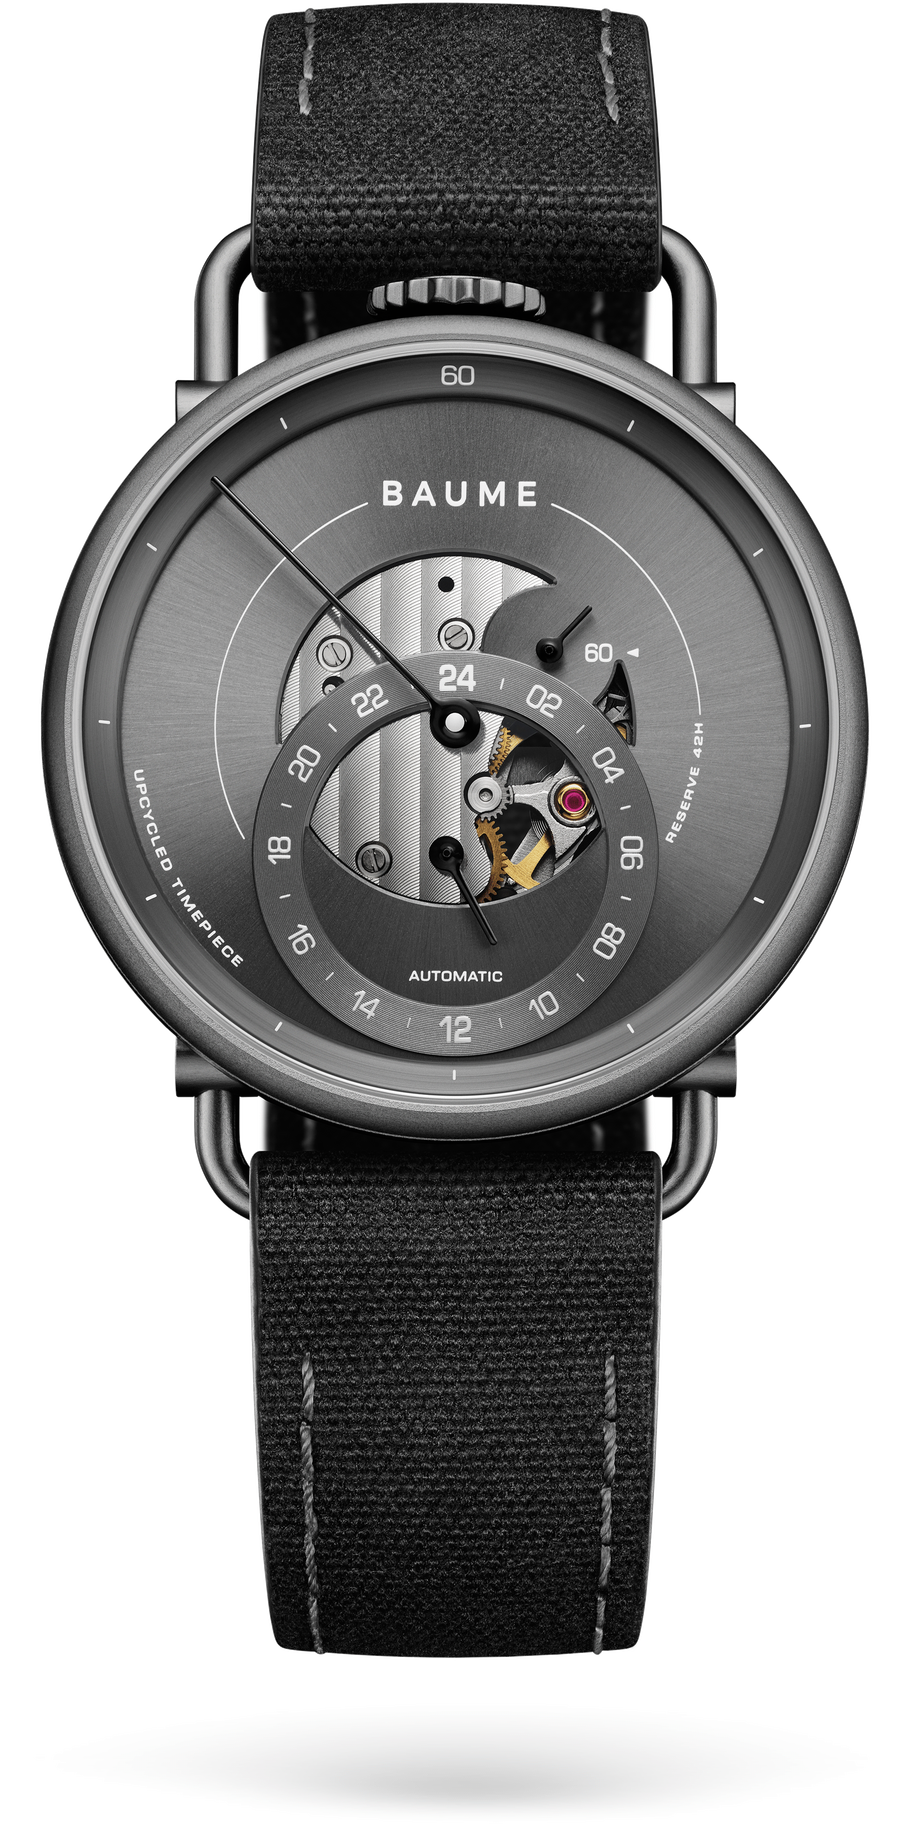 Richemont Launches Baume, Its First New Watch Brand – WWD